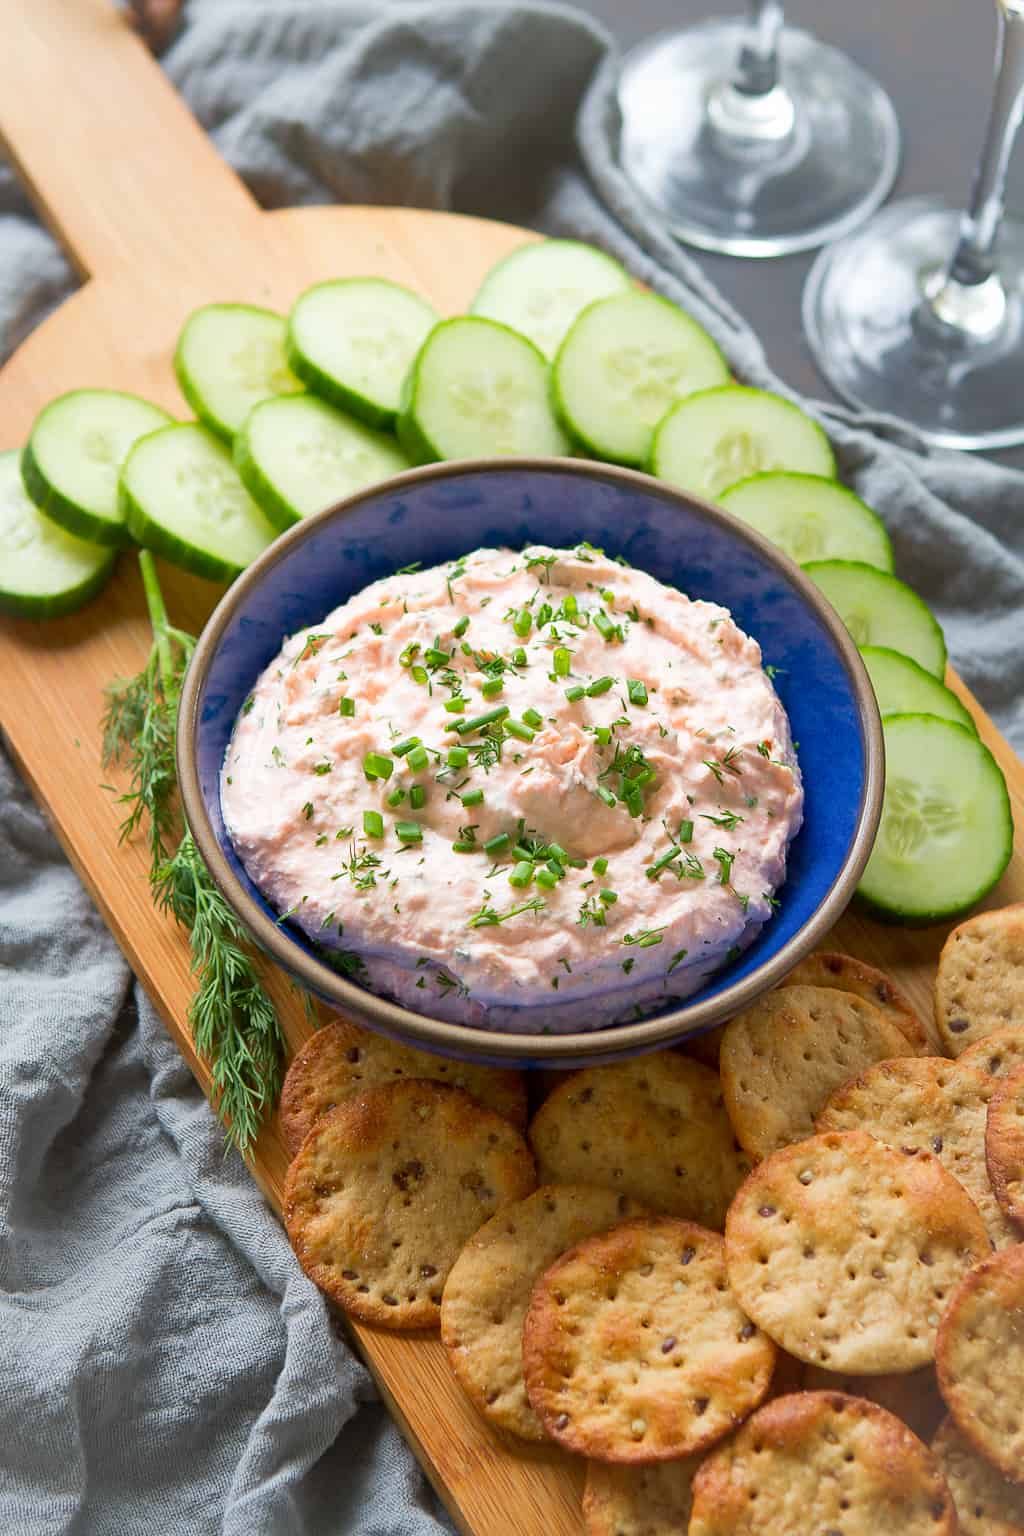 Smoked salmon spread in a bowl on a serving board with cucumber slices and crackers.